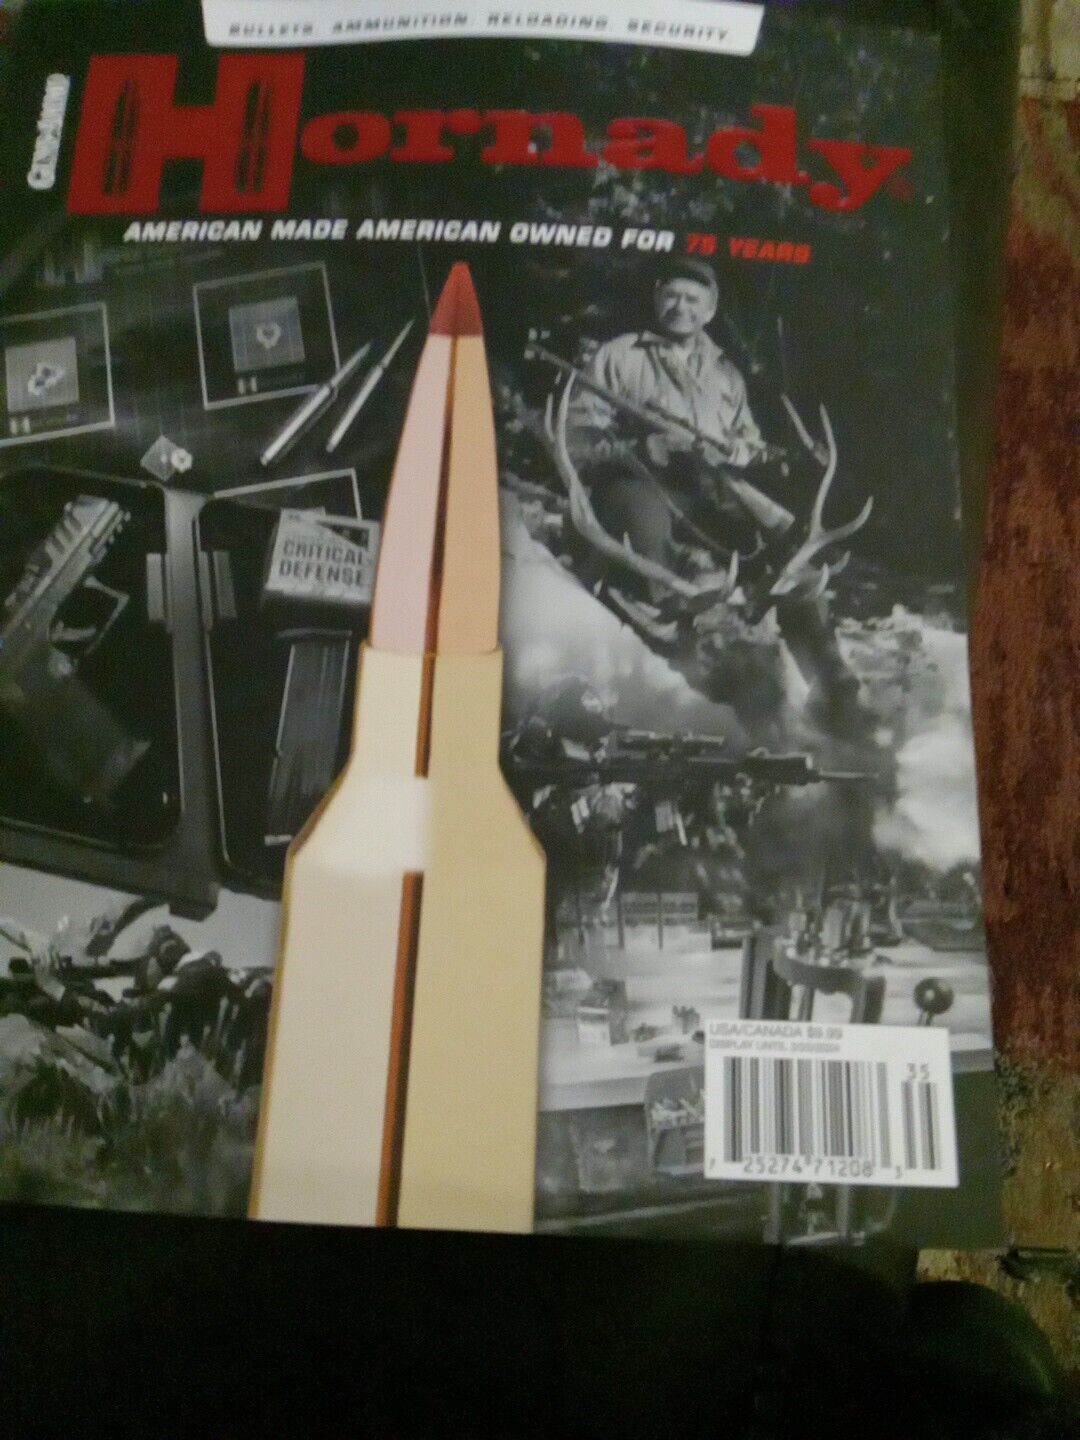 Guns & Ammo Hornady American Made American Owned for 75 Years